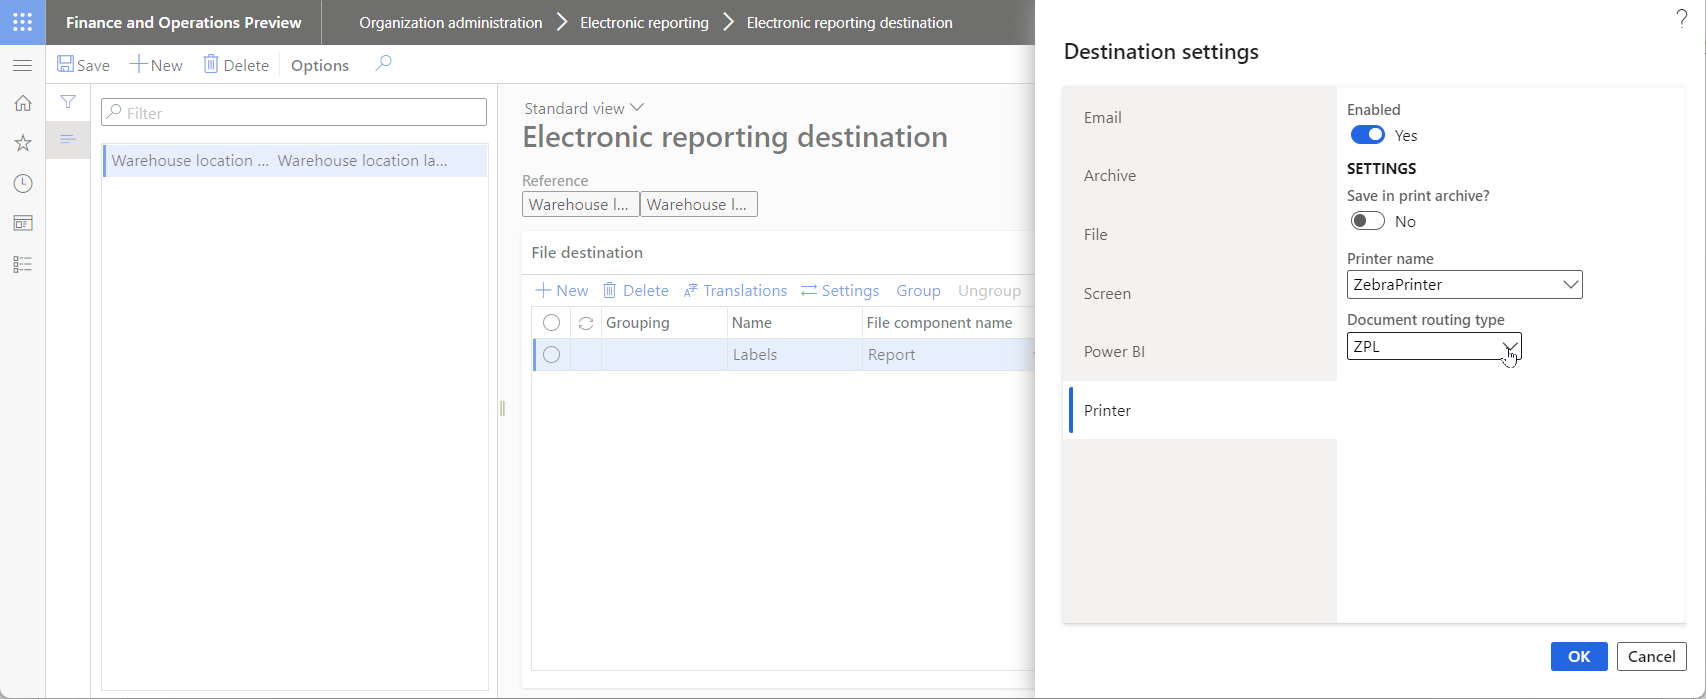 Configuring the ER destination for the Warehouse location labels format on the Electronic reporting destination page.